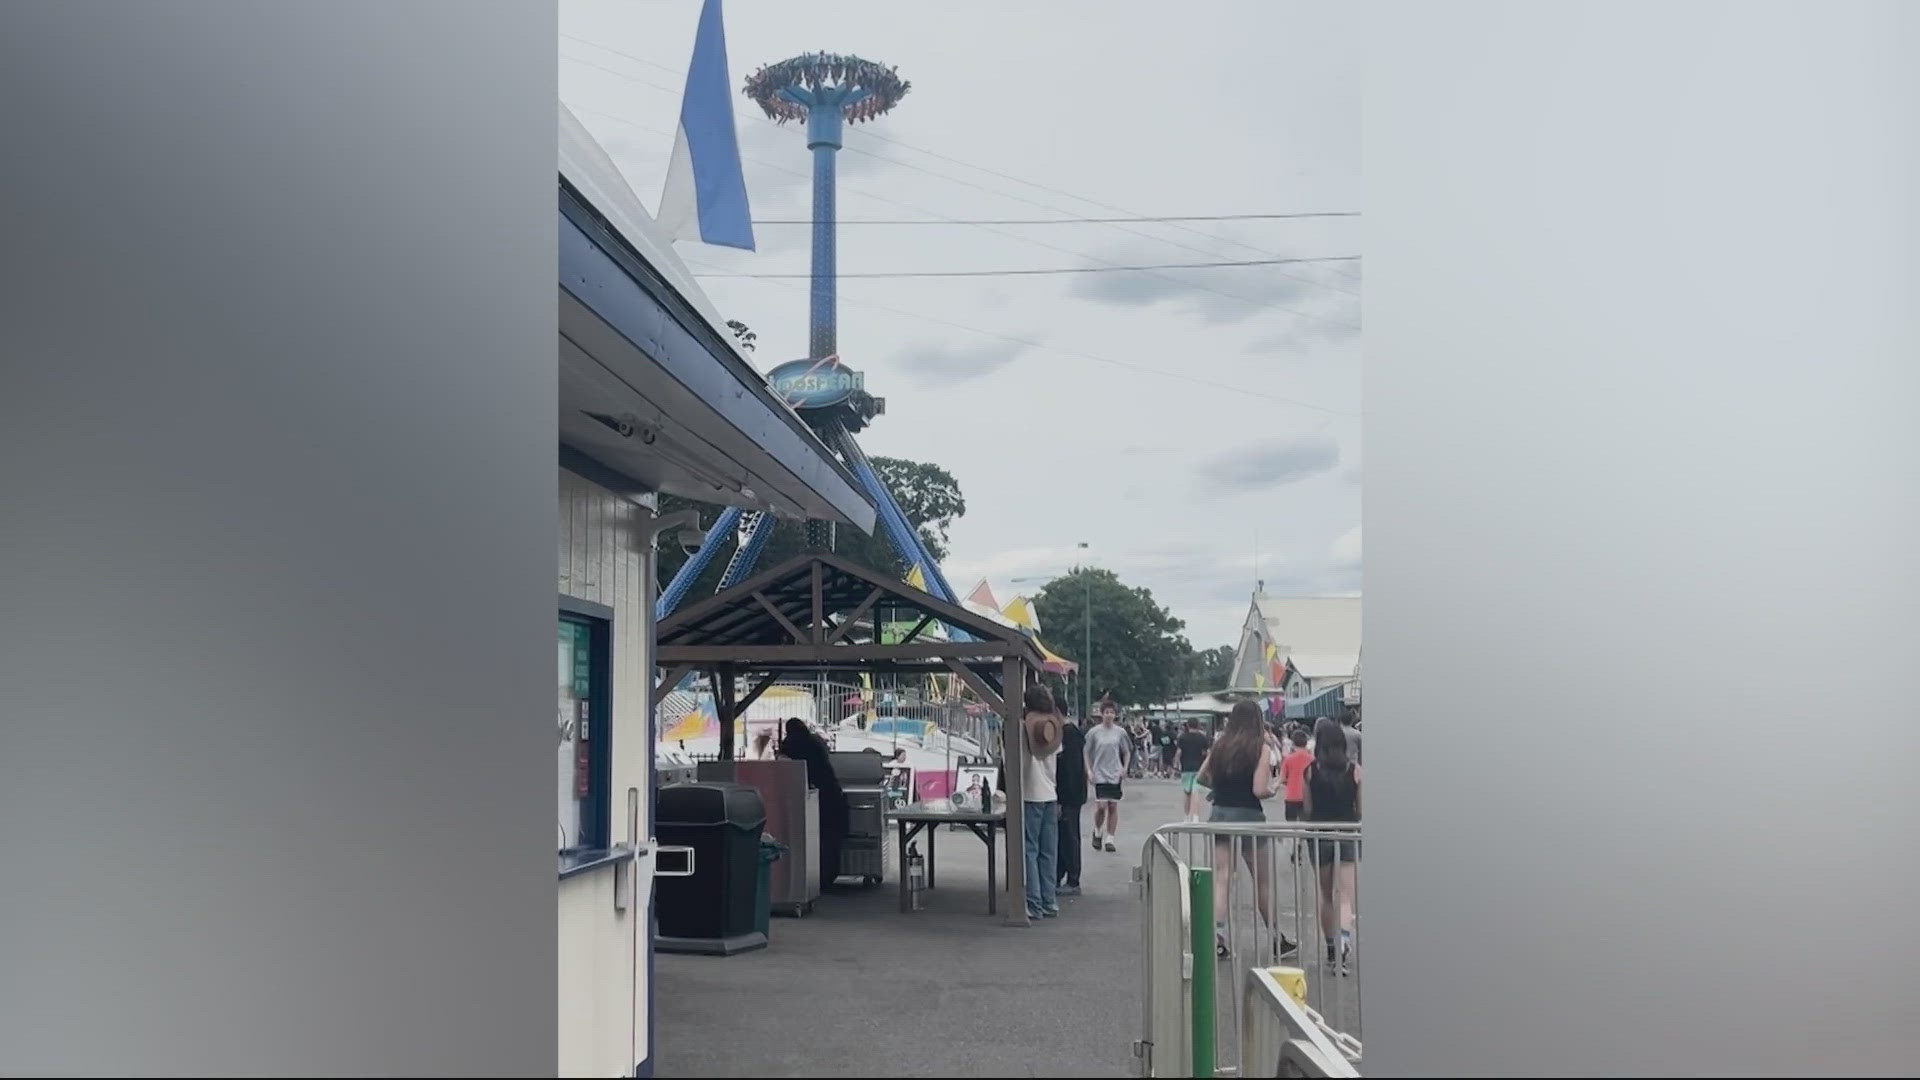 After 28 people were trapped upside down 50 feet in the air after the AtmosFEAR malfunctioned, Oaks Park is facing a lawsuit filed on behalf of a teenager.